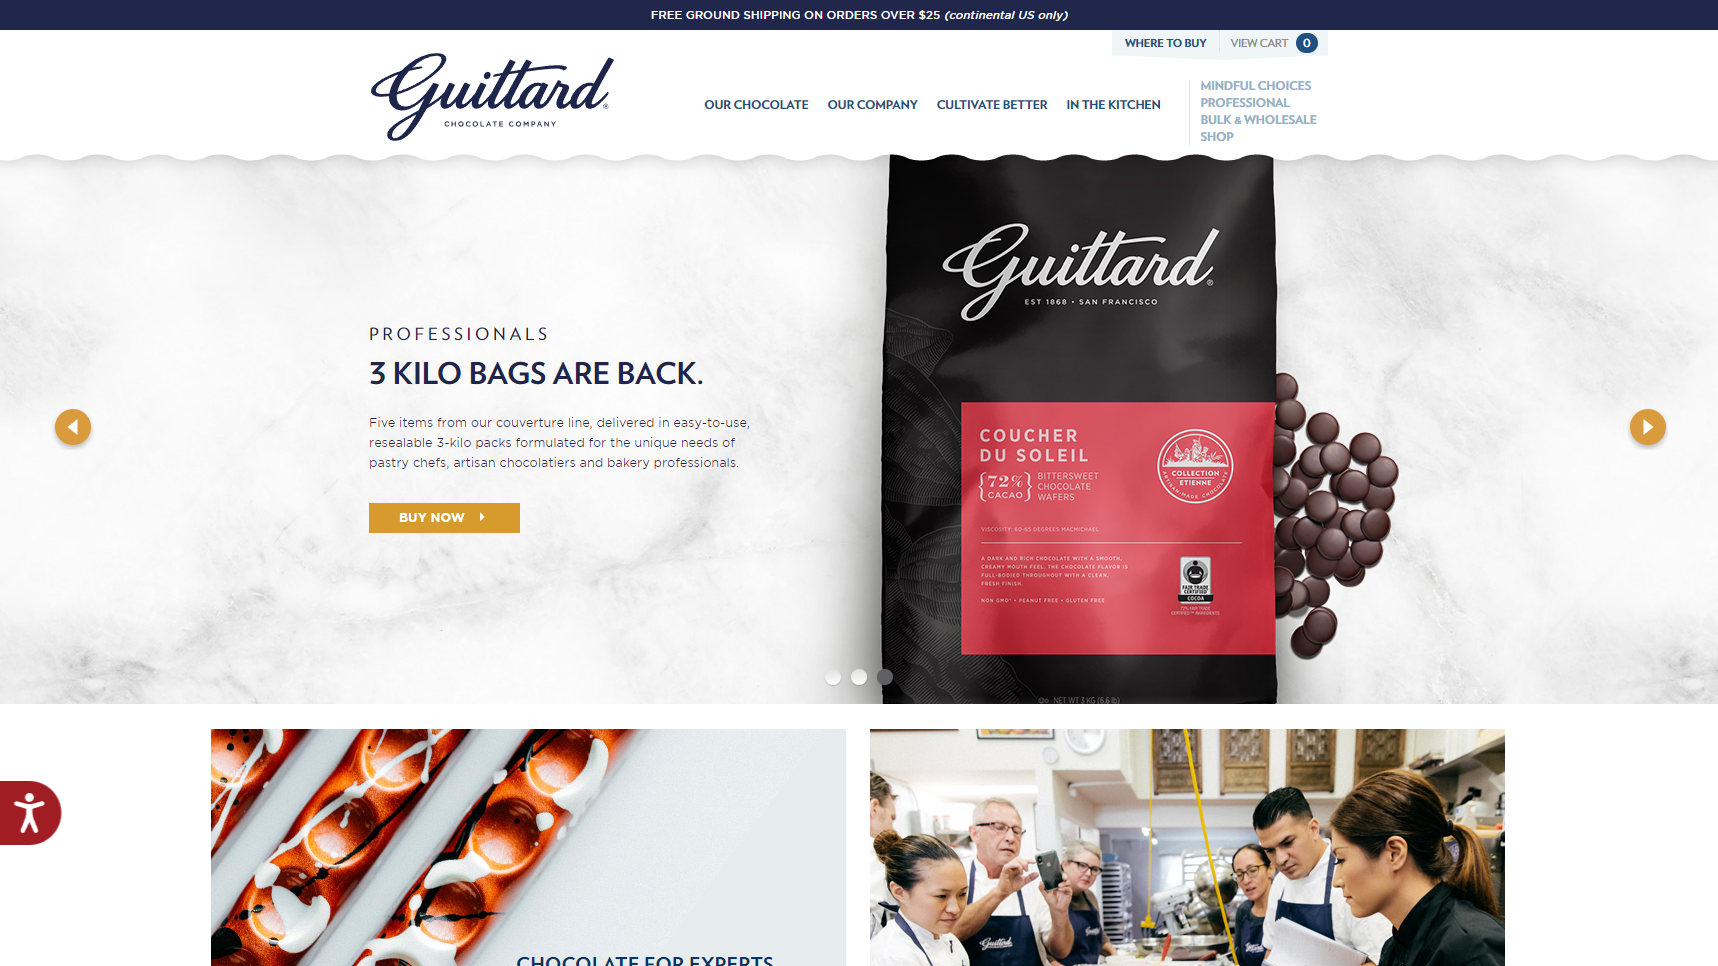 Guittard Chocolate Company - Candy Manufacturer